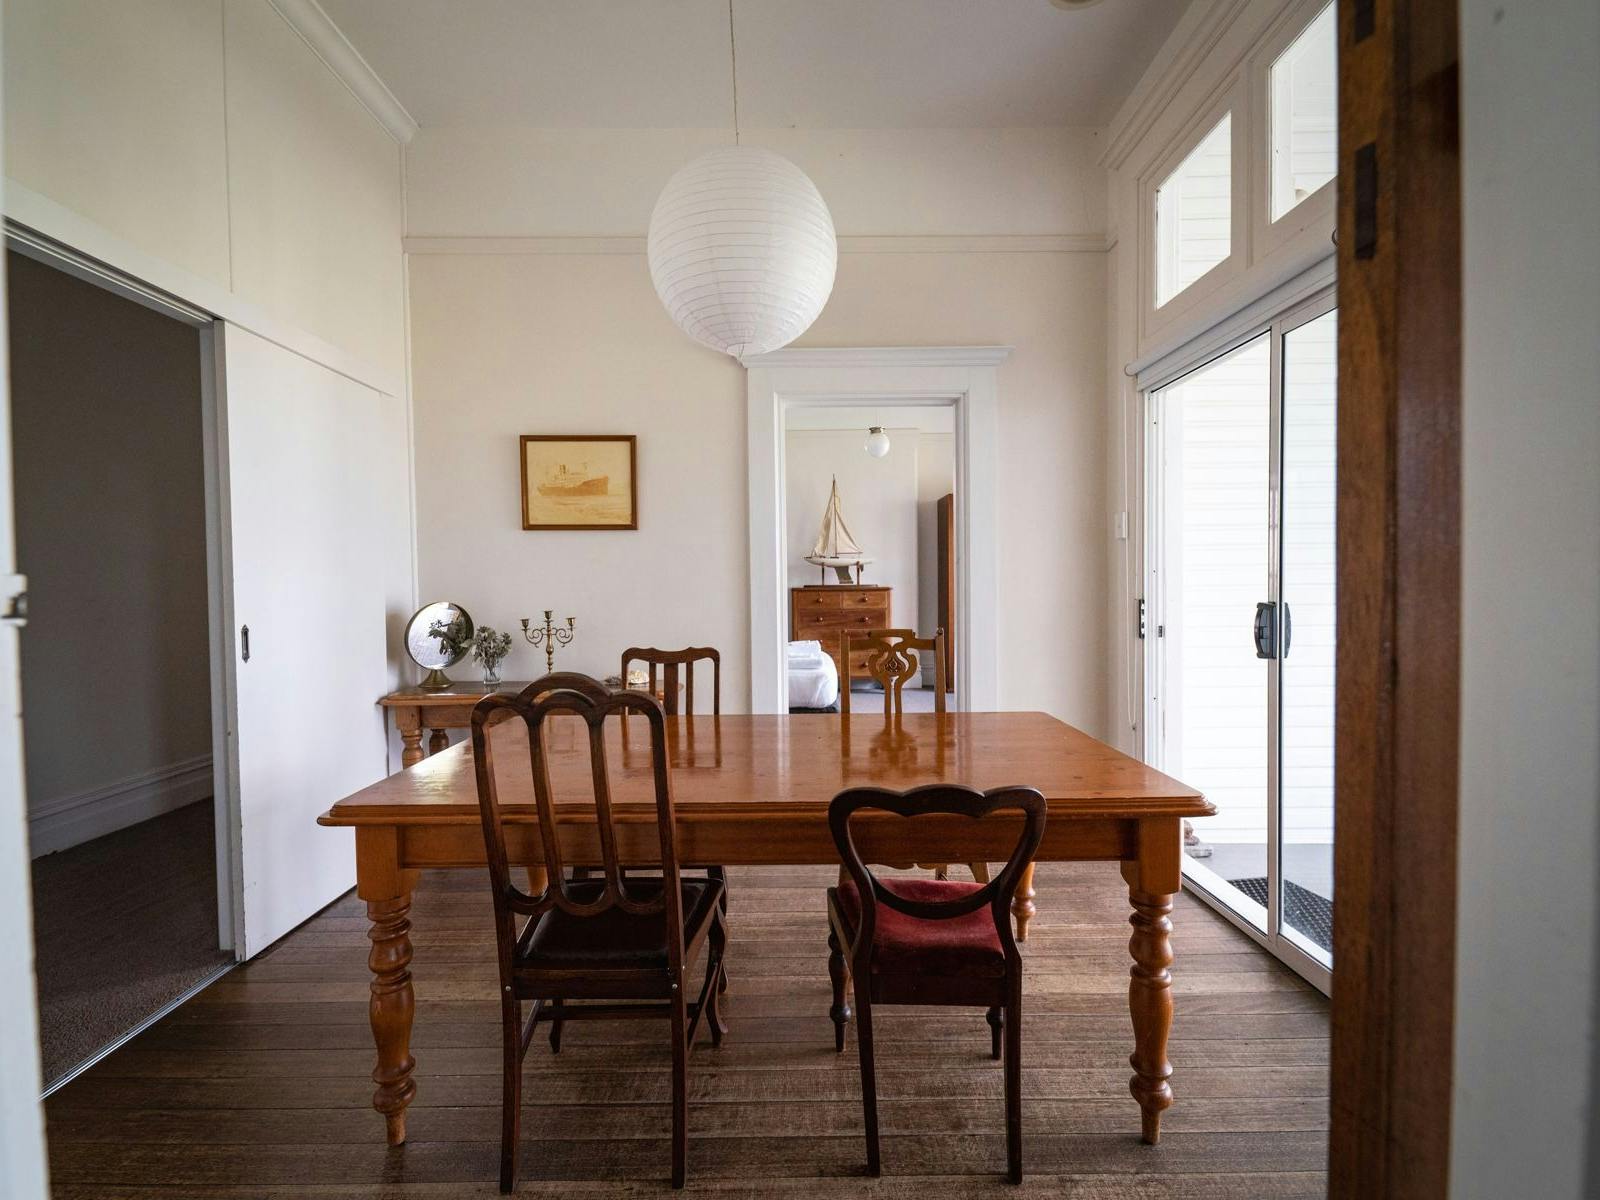 Beautiful historic features in all houses, family dining, natural light filled spaces